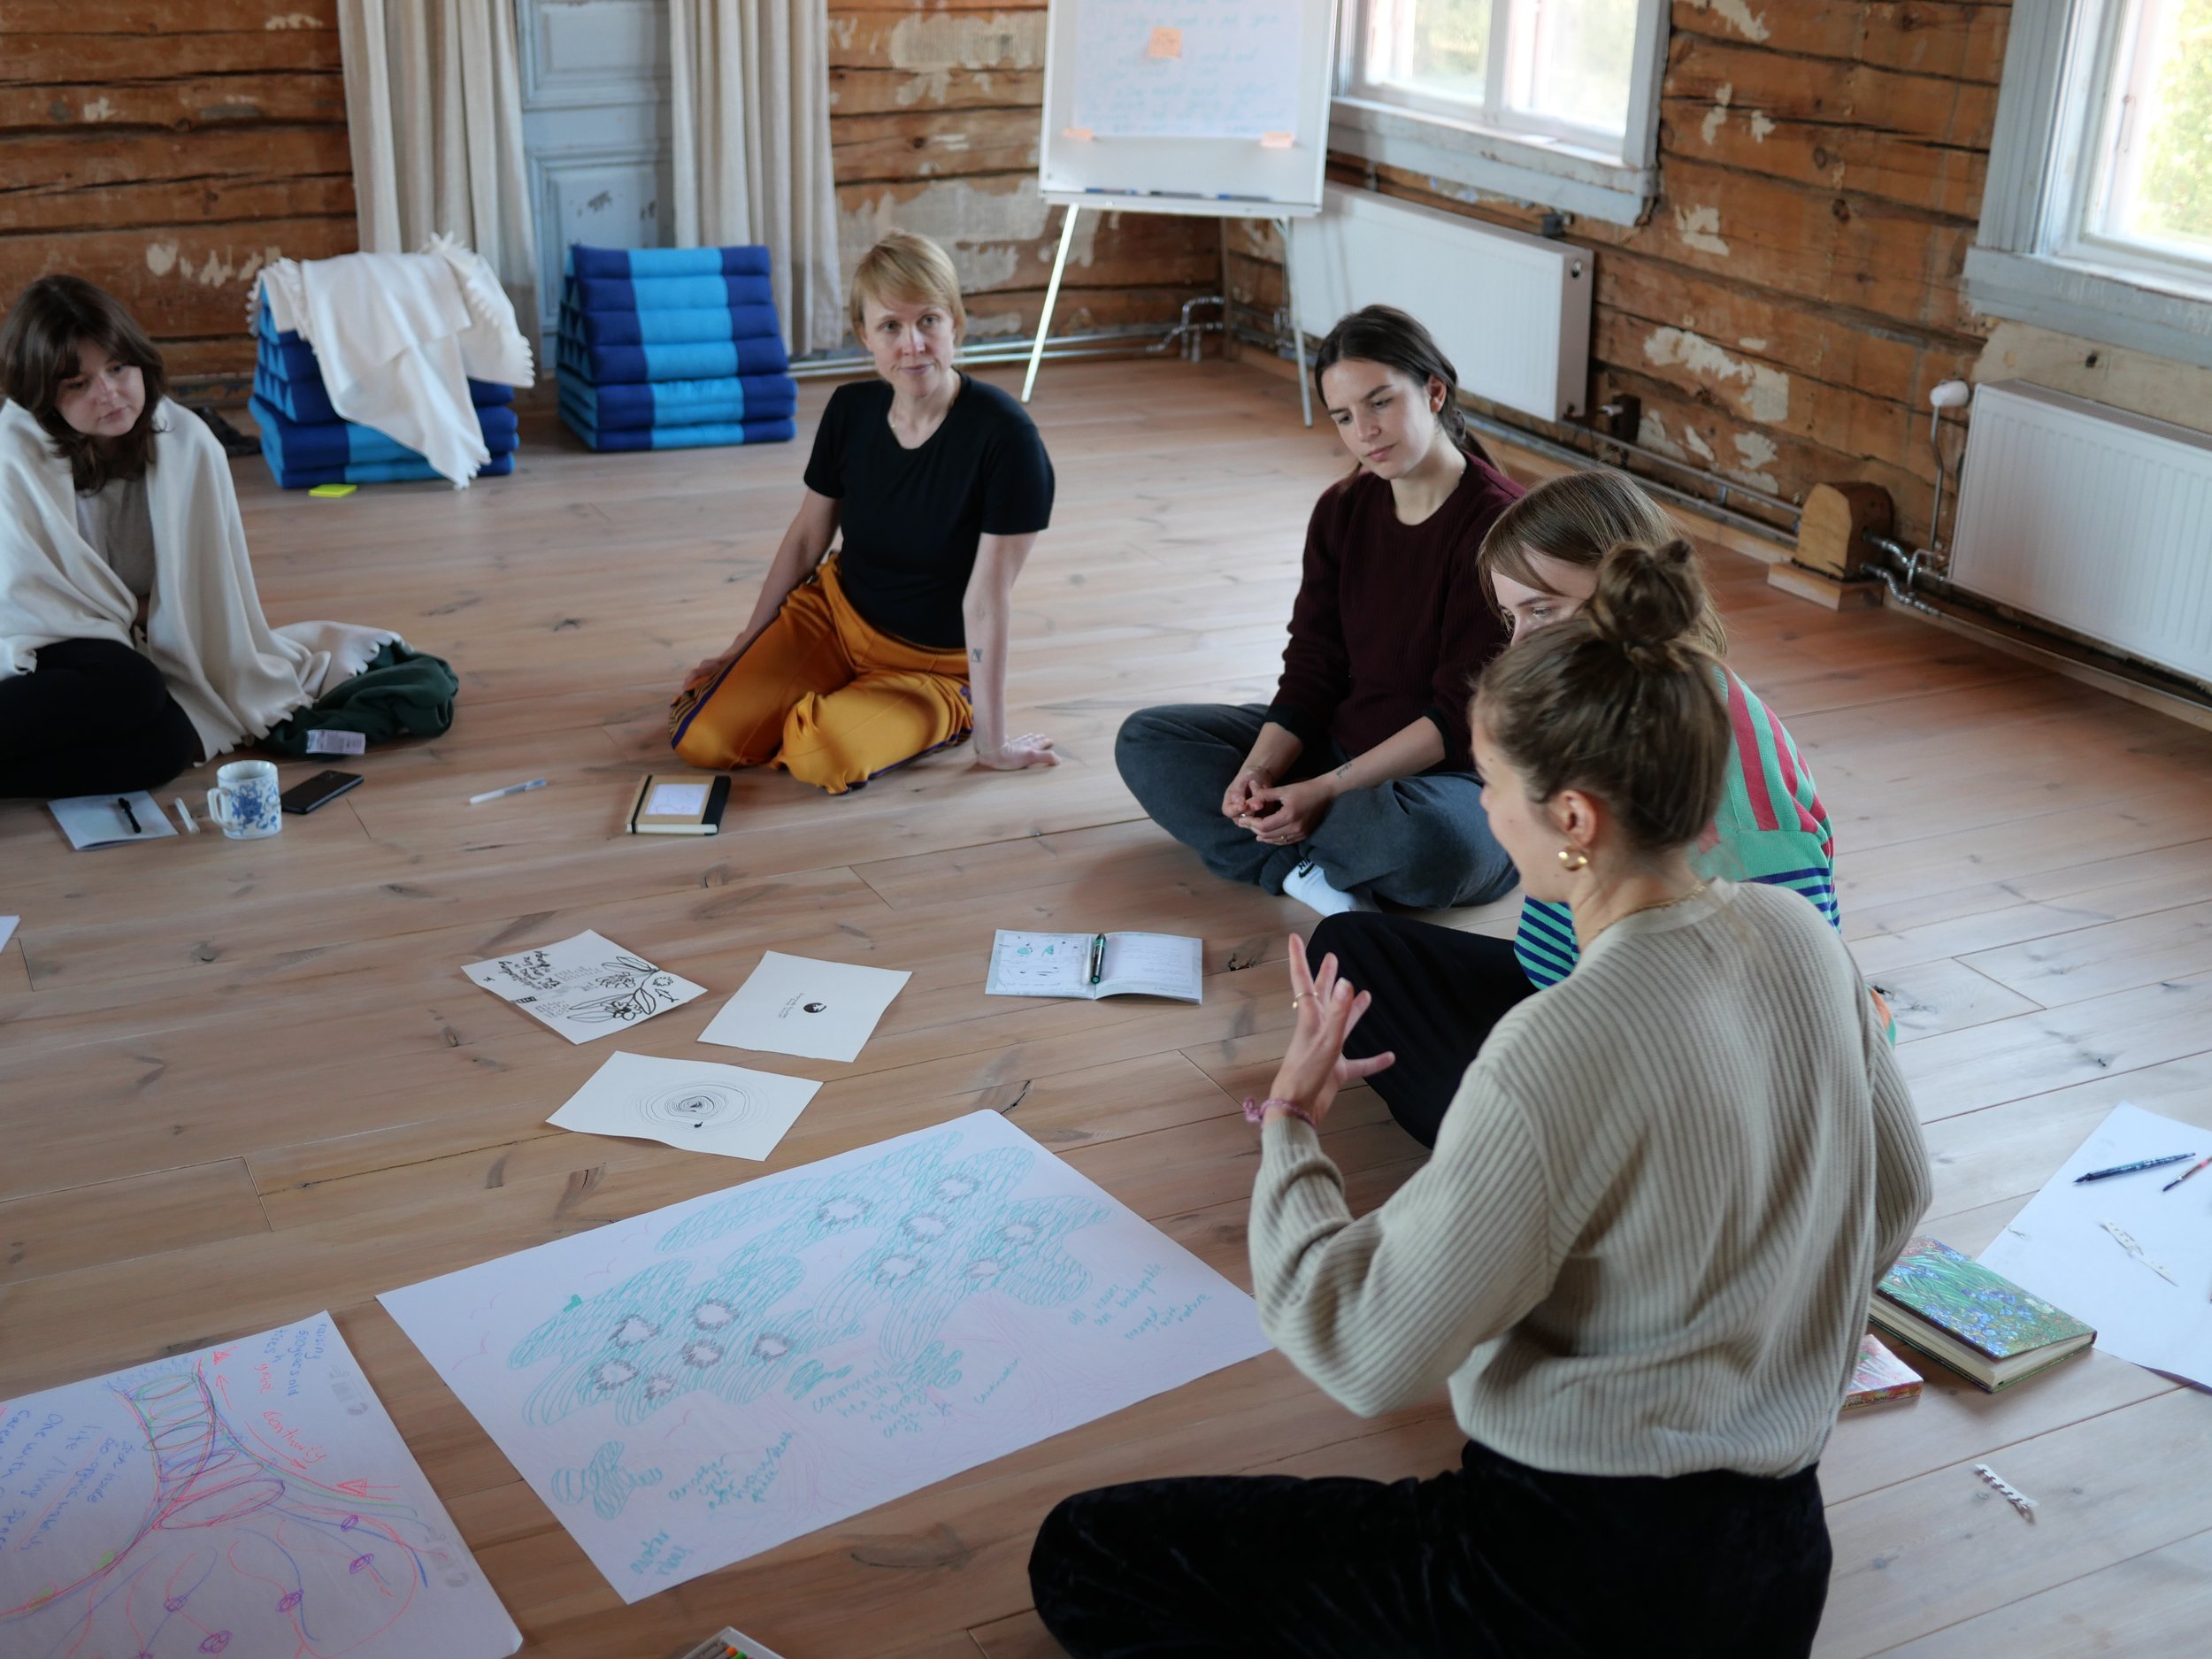  The group share their visions of a more just and sustainable future 